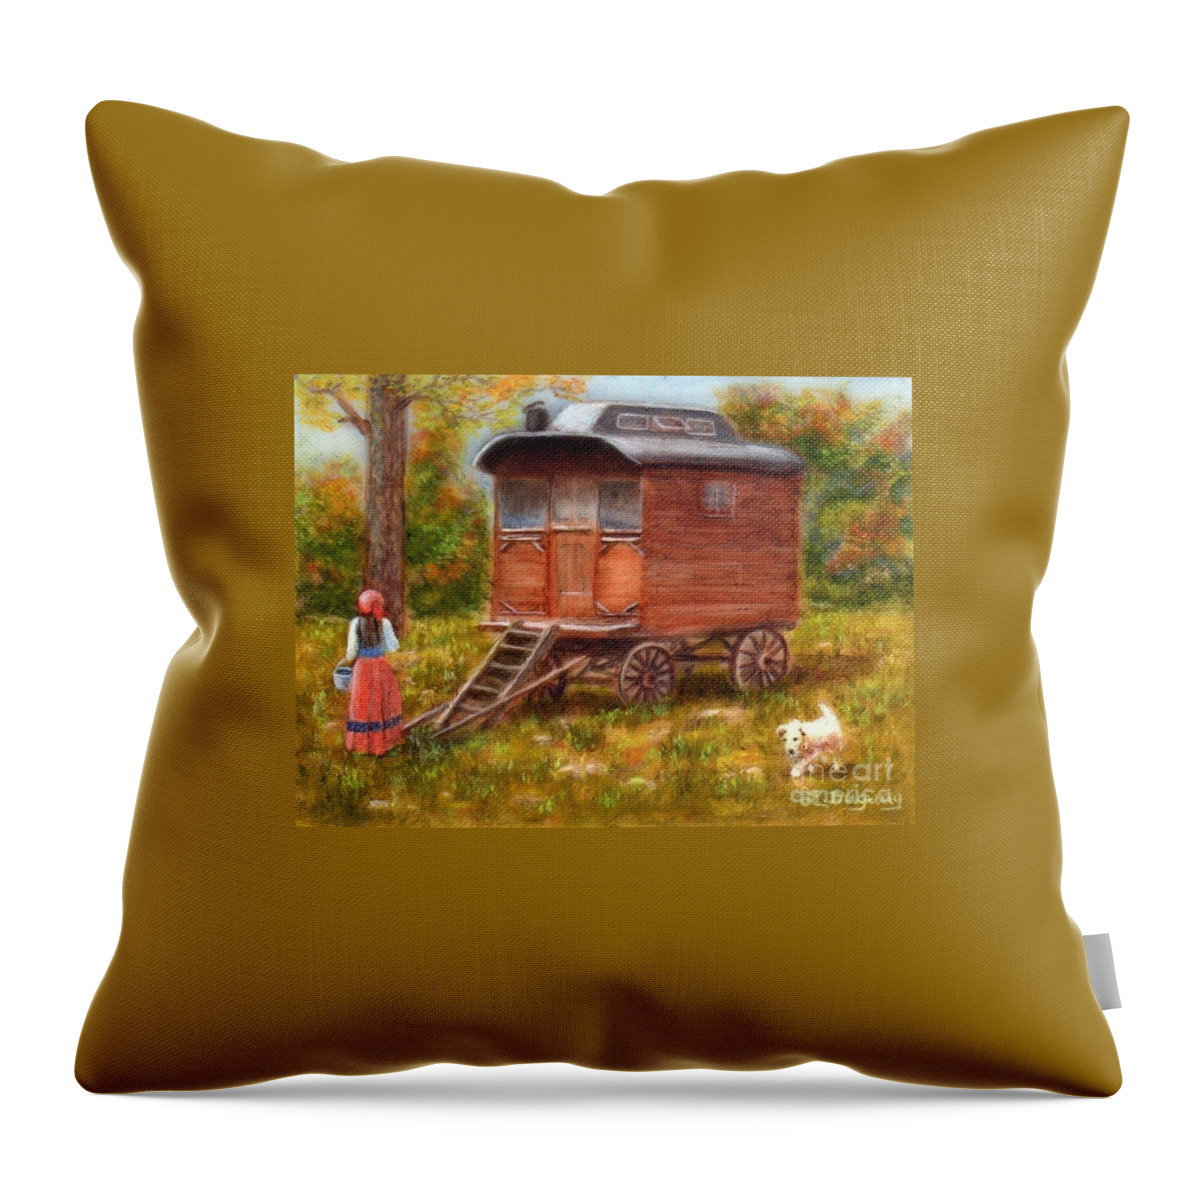 Caravan Throw Pillow featuring the painting The Gypsy Caravan by Lora Duguay